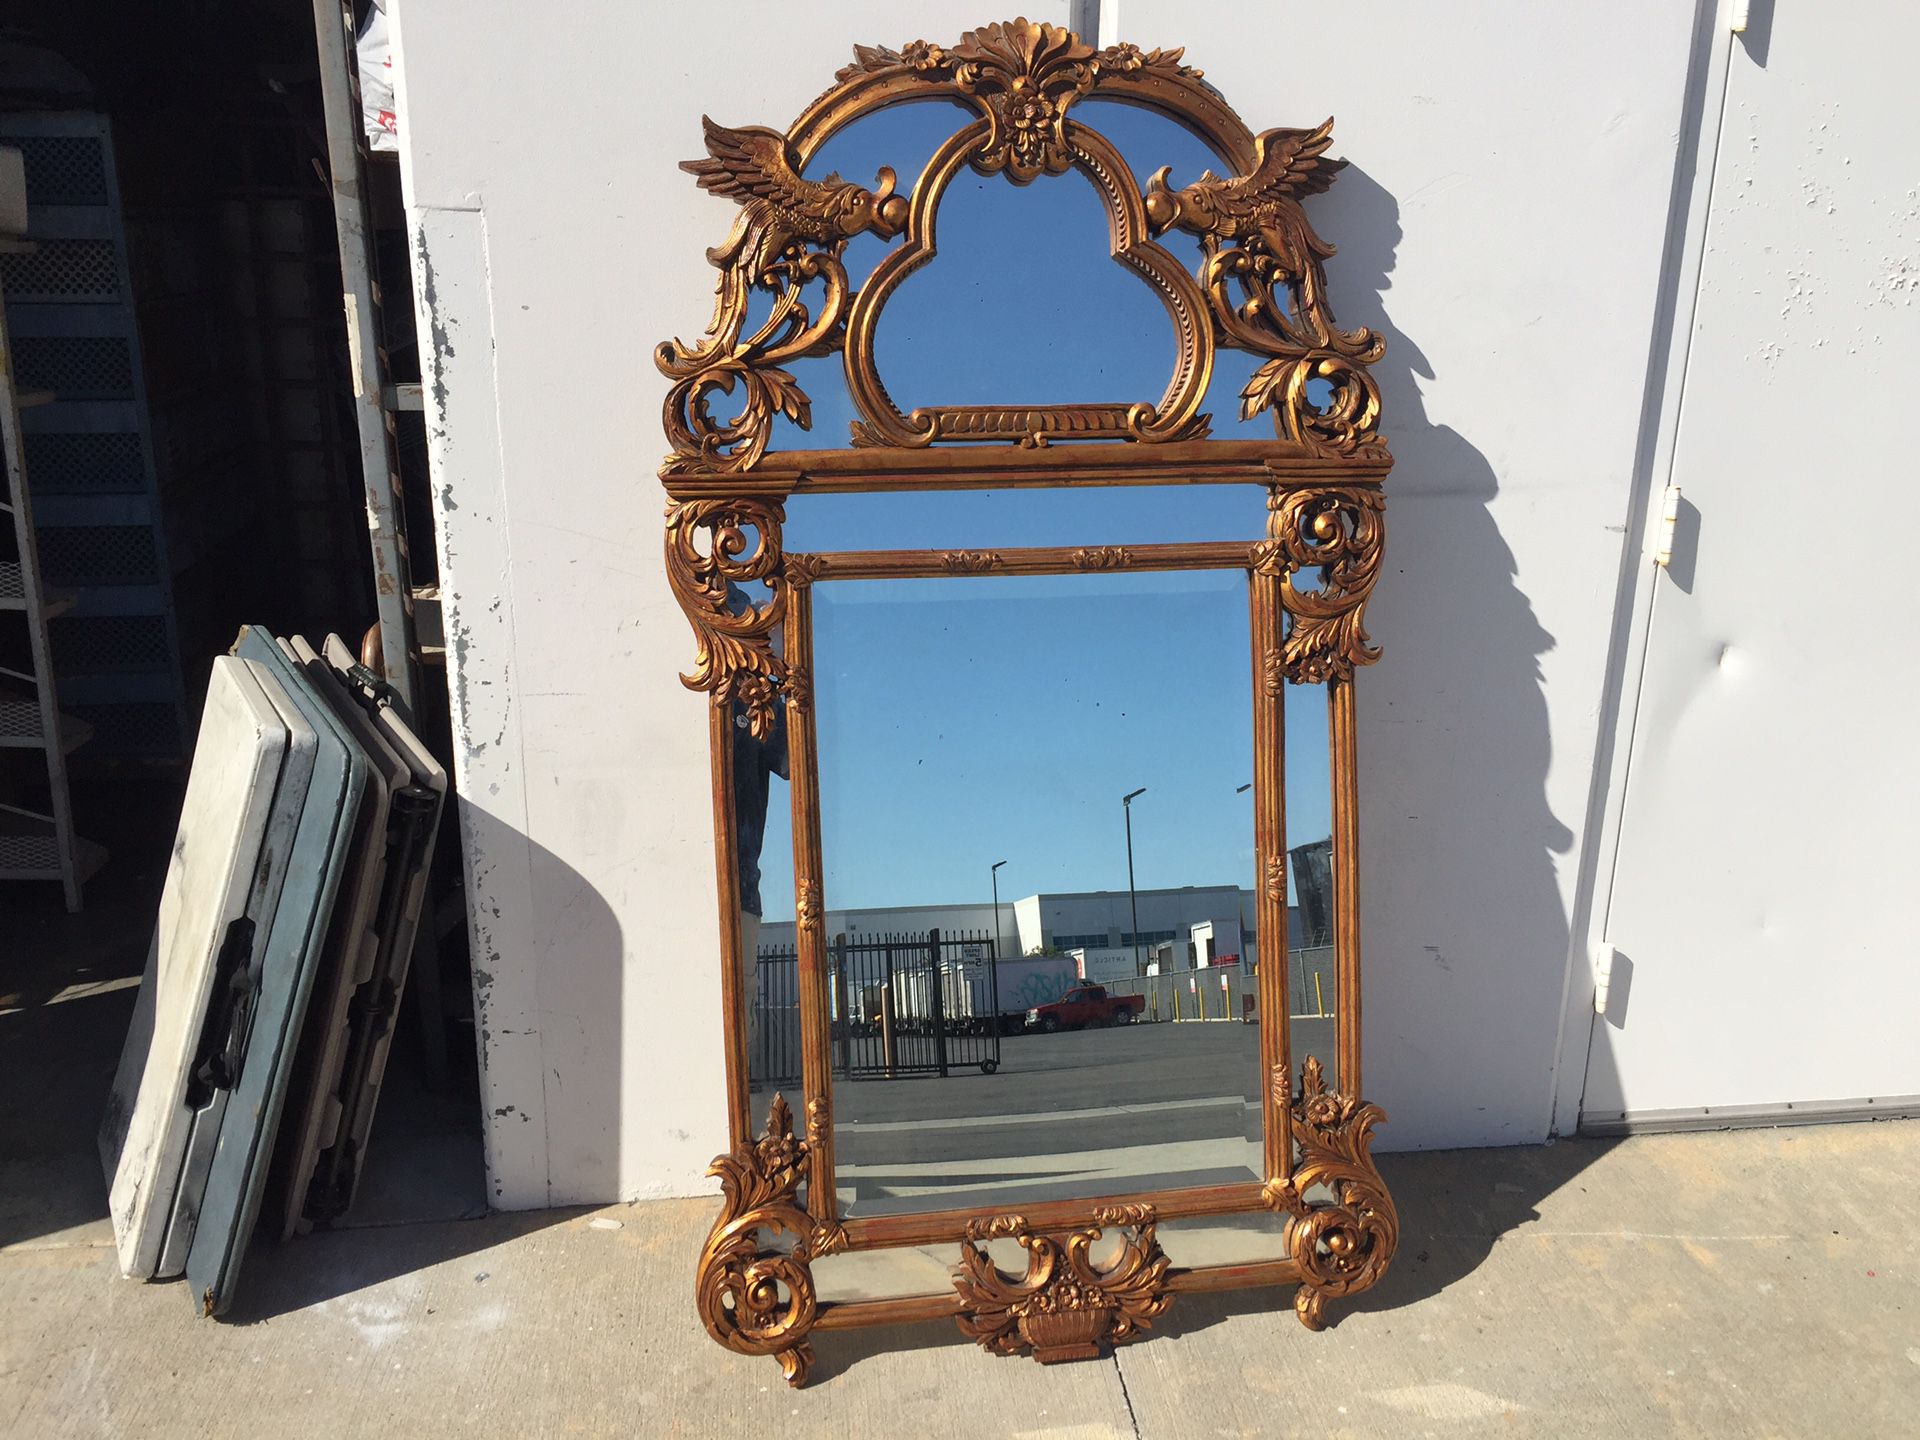 WINDSOR ART AND MIRROR COMPANY GILT FRAME BEVELED HALL OR ENTRYWAY MIRROR WITH FLYING koi FISH BIRDS dragons